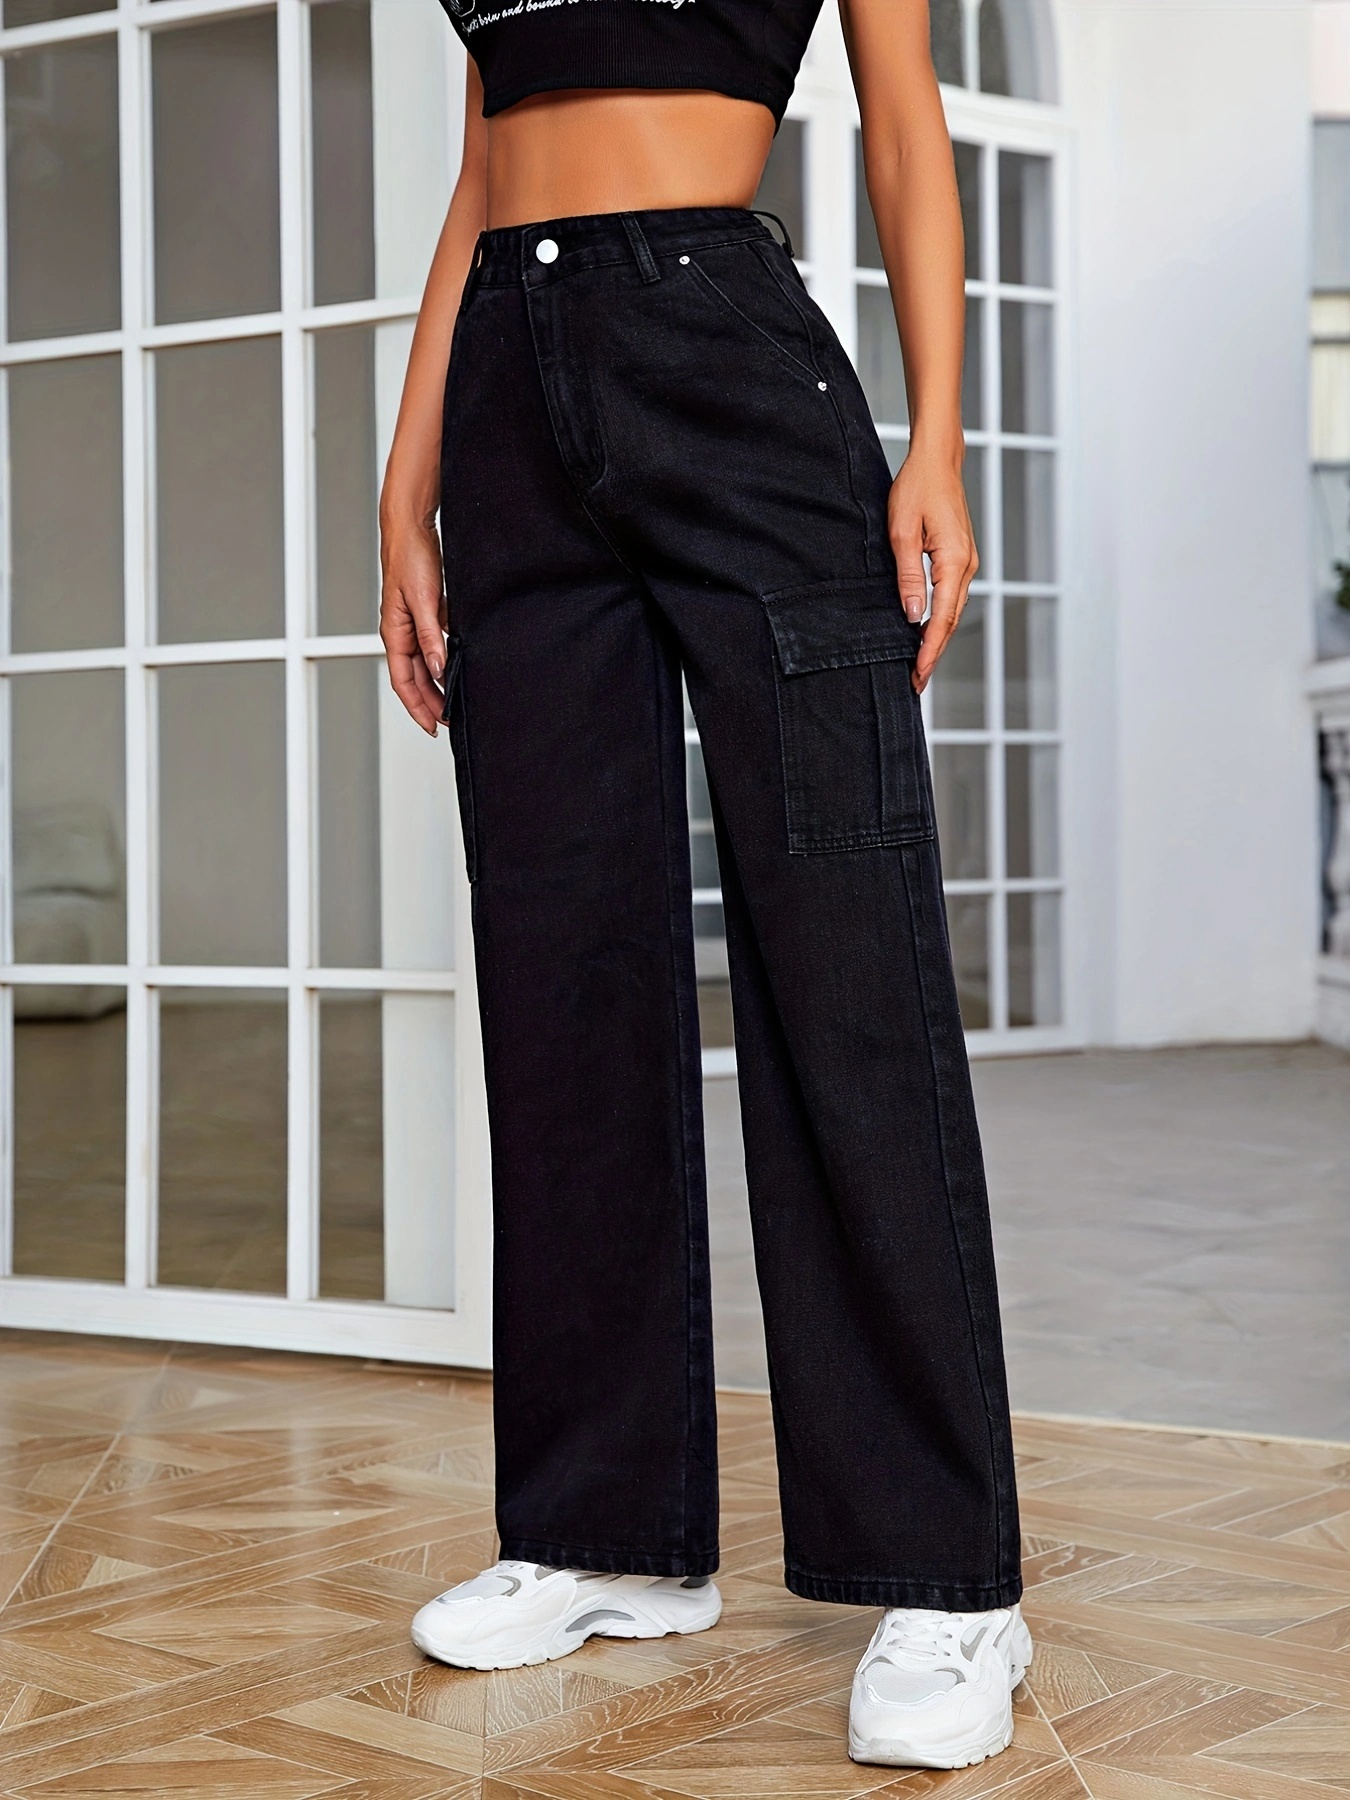 Black Cargo Flare Black Cargo Trousers Womens With Pocket For High